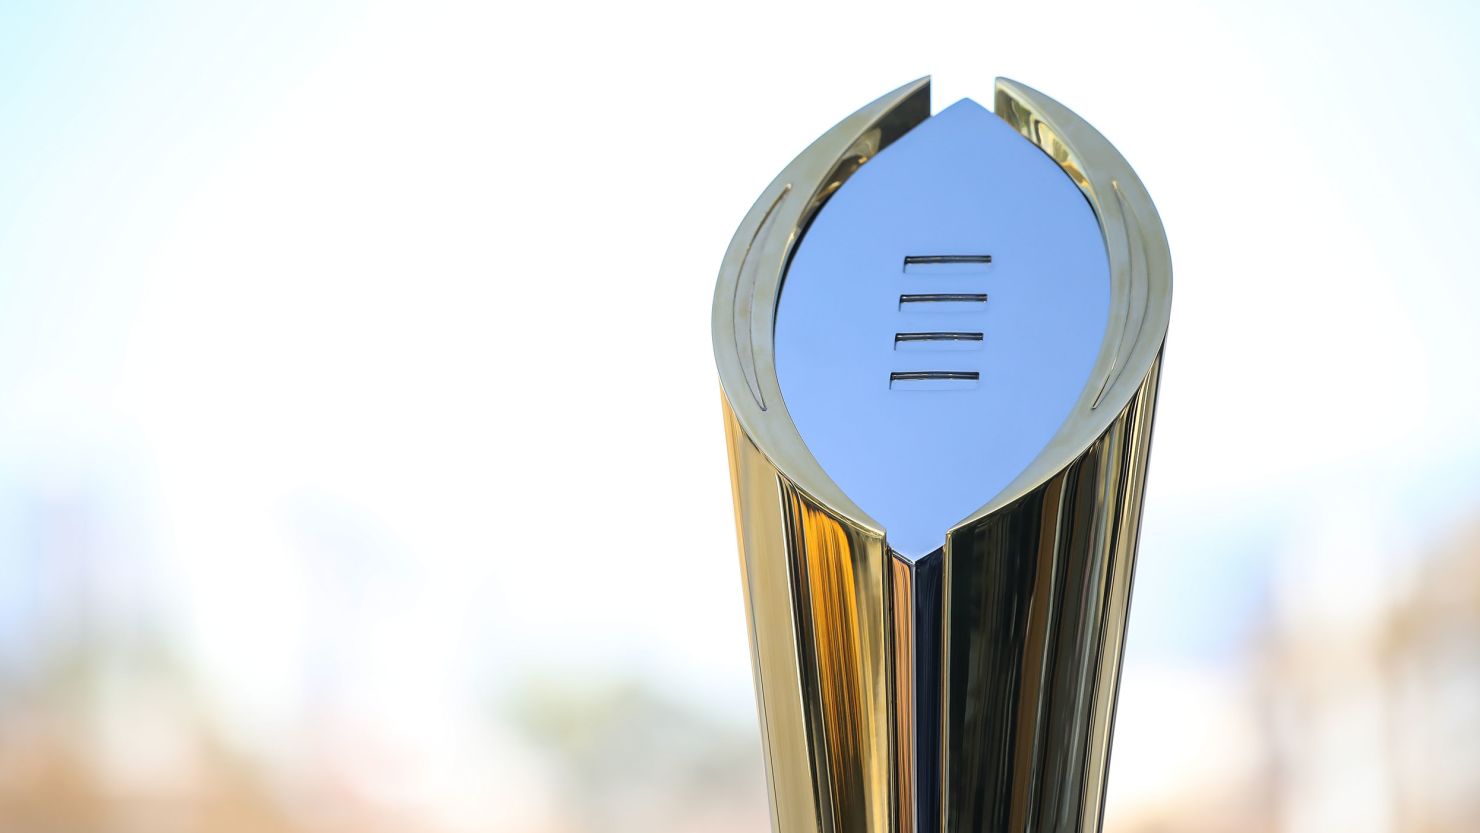 The College Football Playoff Trophy waits to be won.